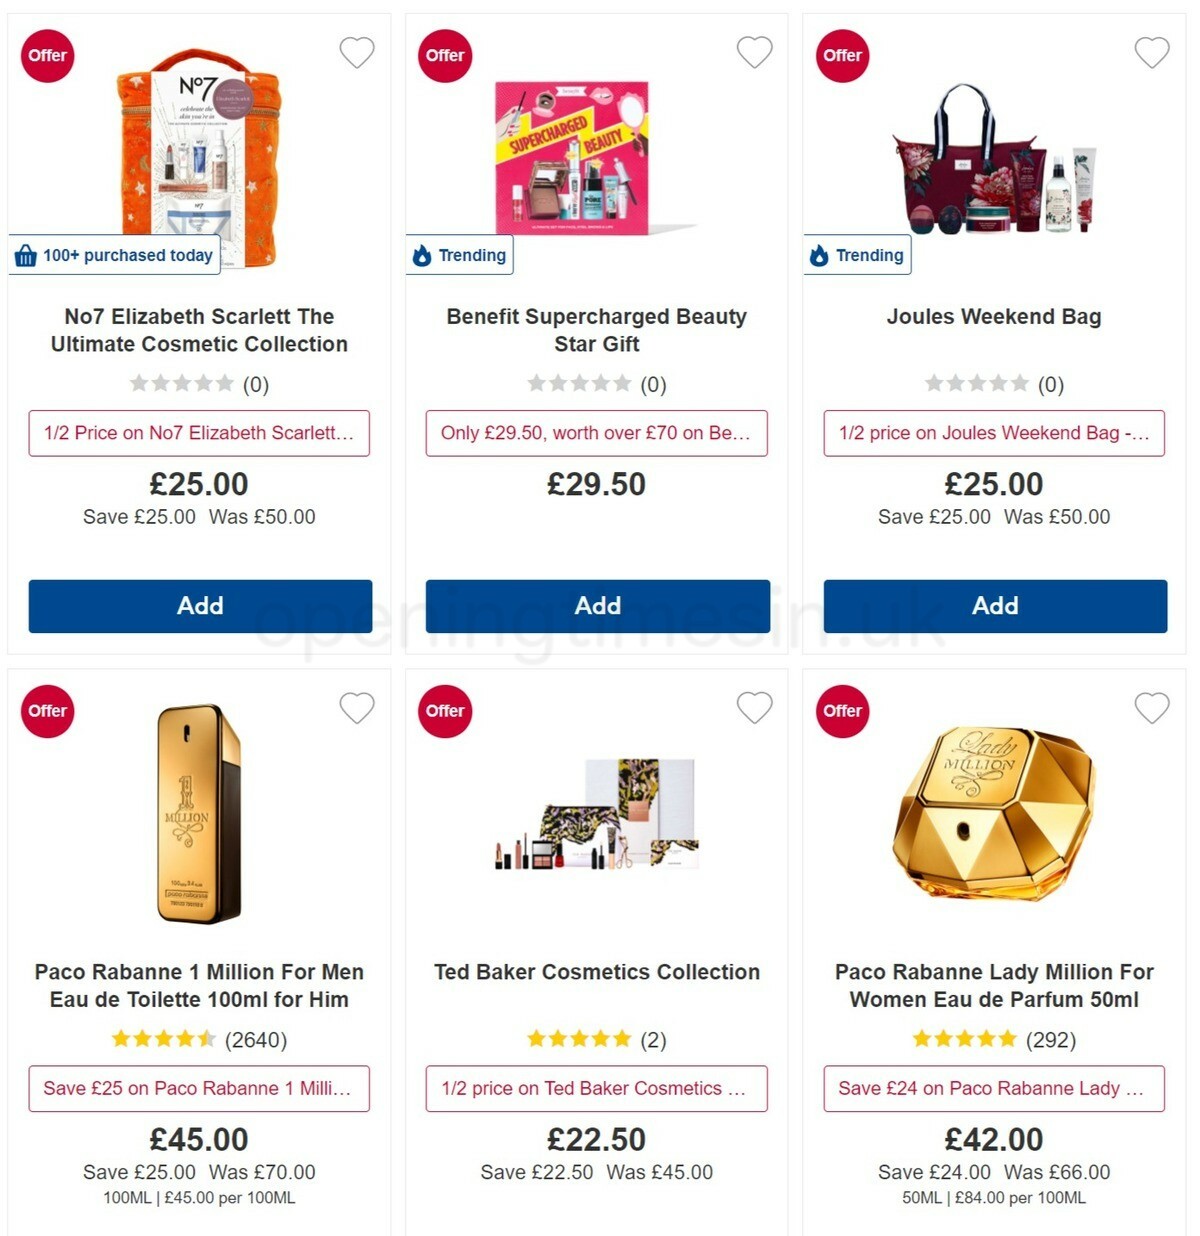 Boots Offers from 30 November